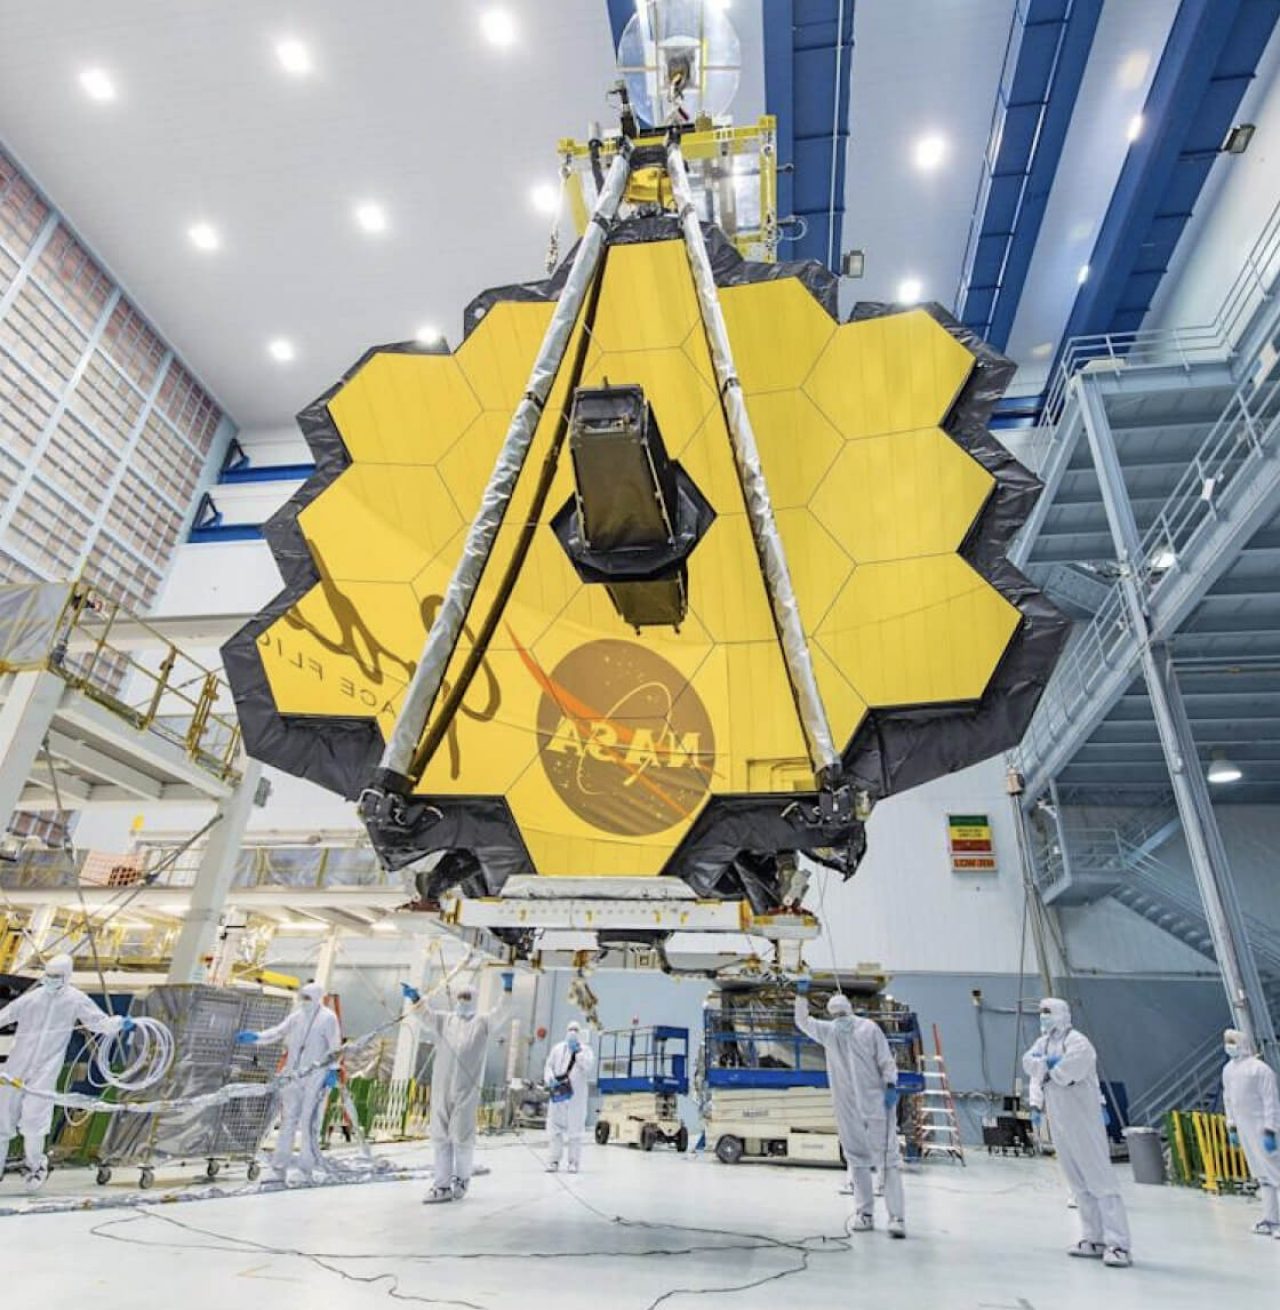 NASA technicians lifting the telescope and moving it into the clean room at NASA’s Goddard Space Flight Center in Greenbelt, MD